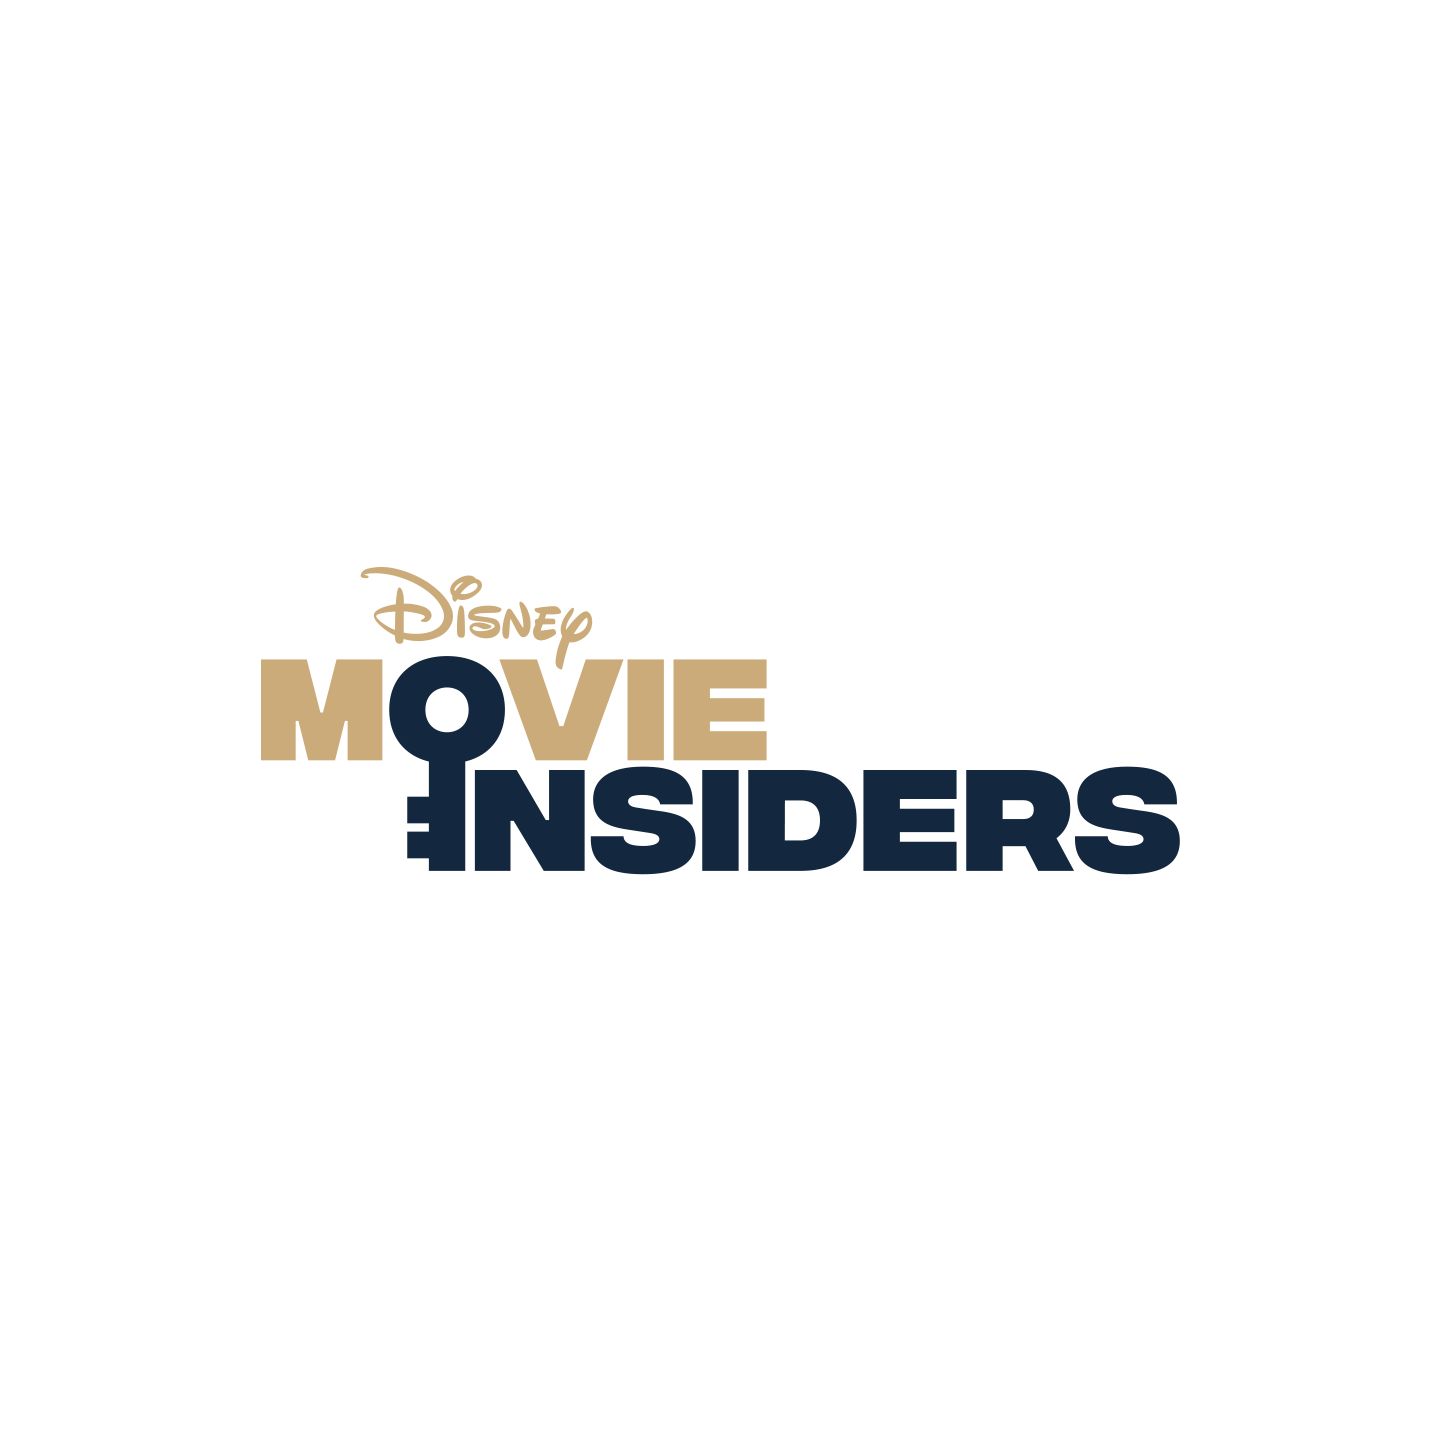 THE INSIDER 5 FEATURING: PETE DOCTER